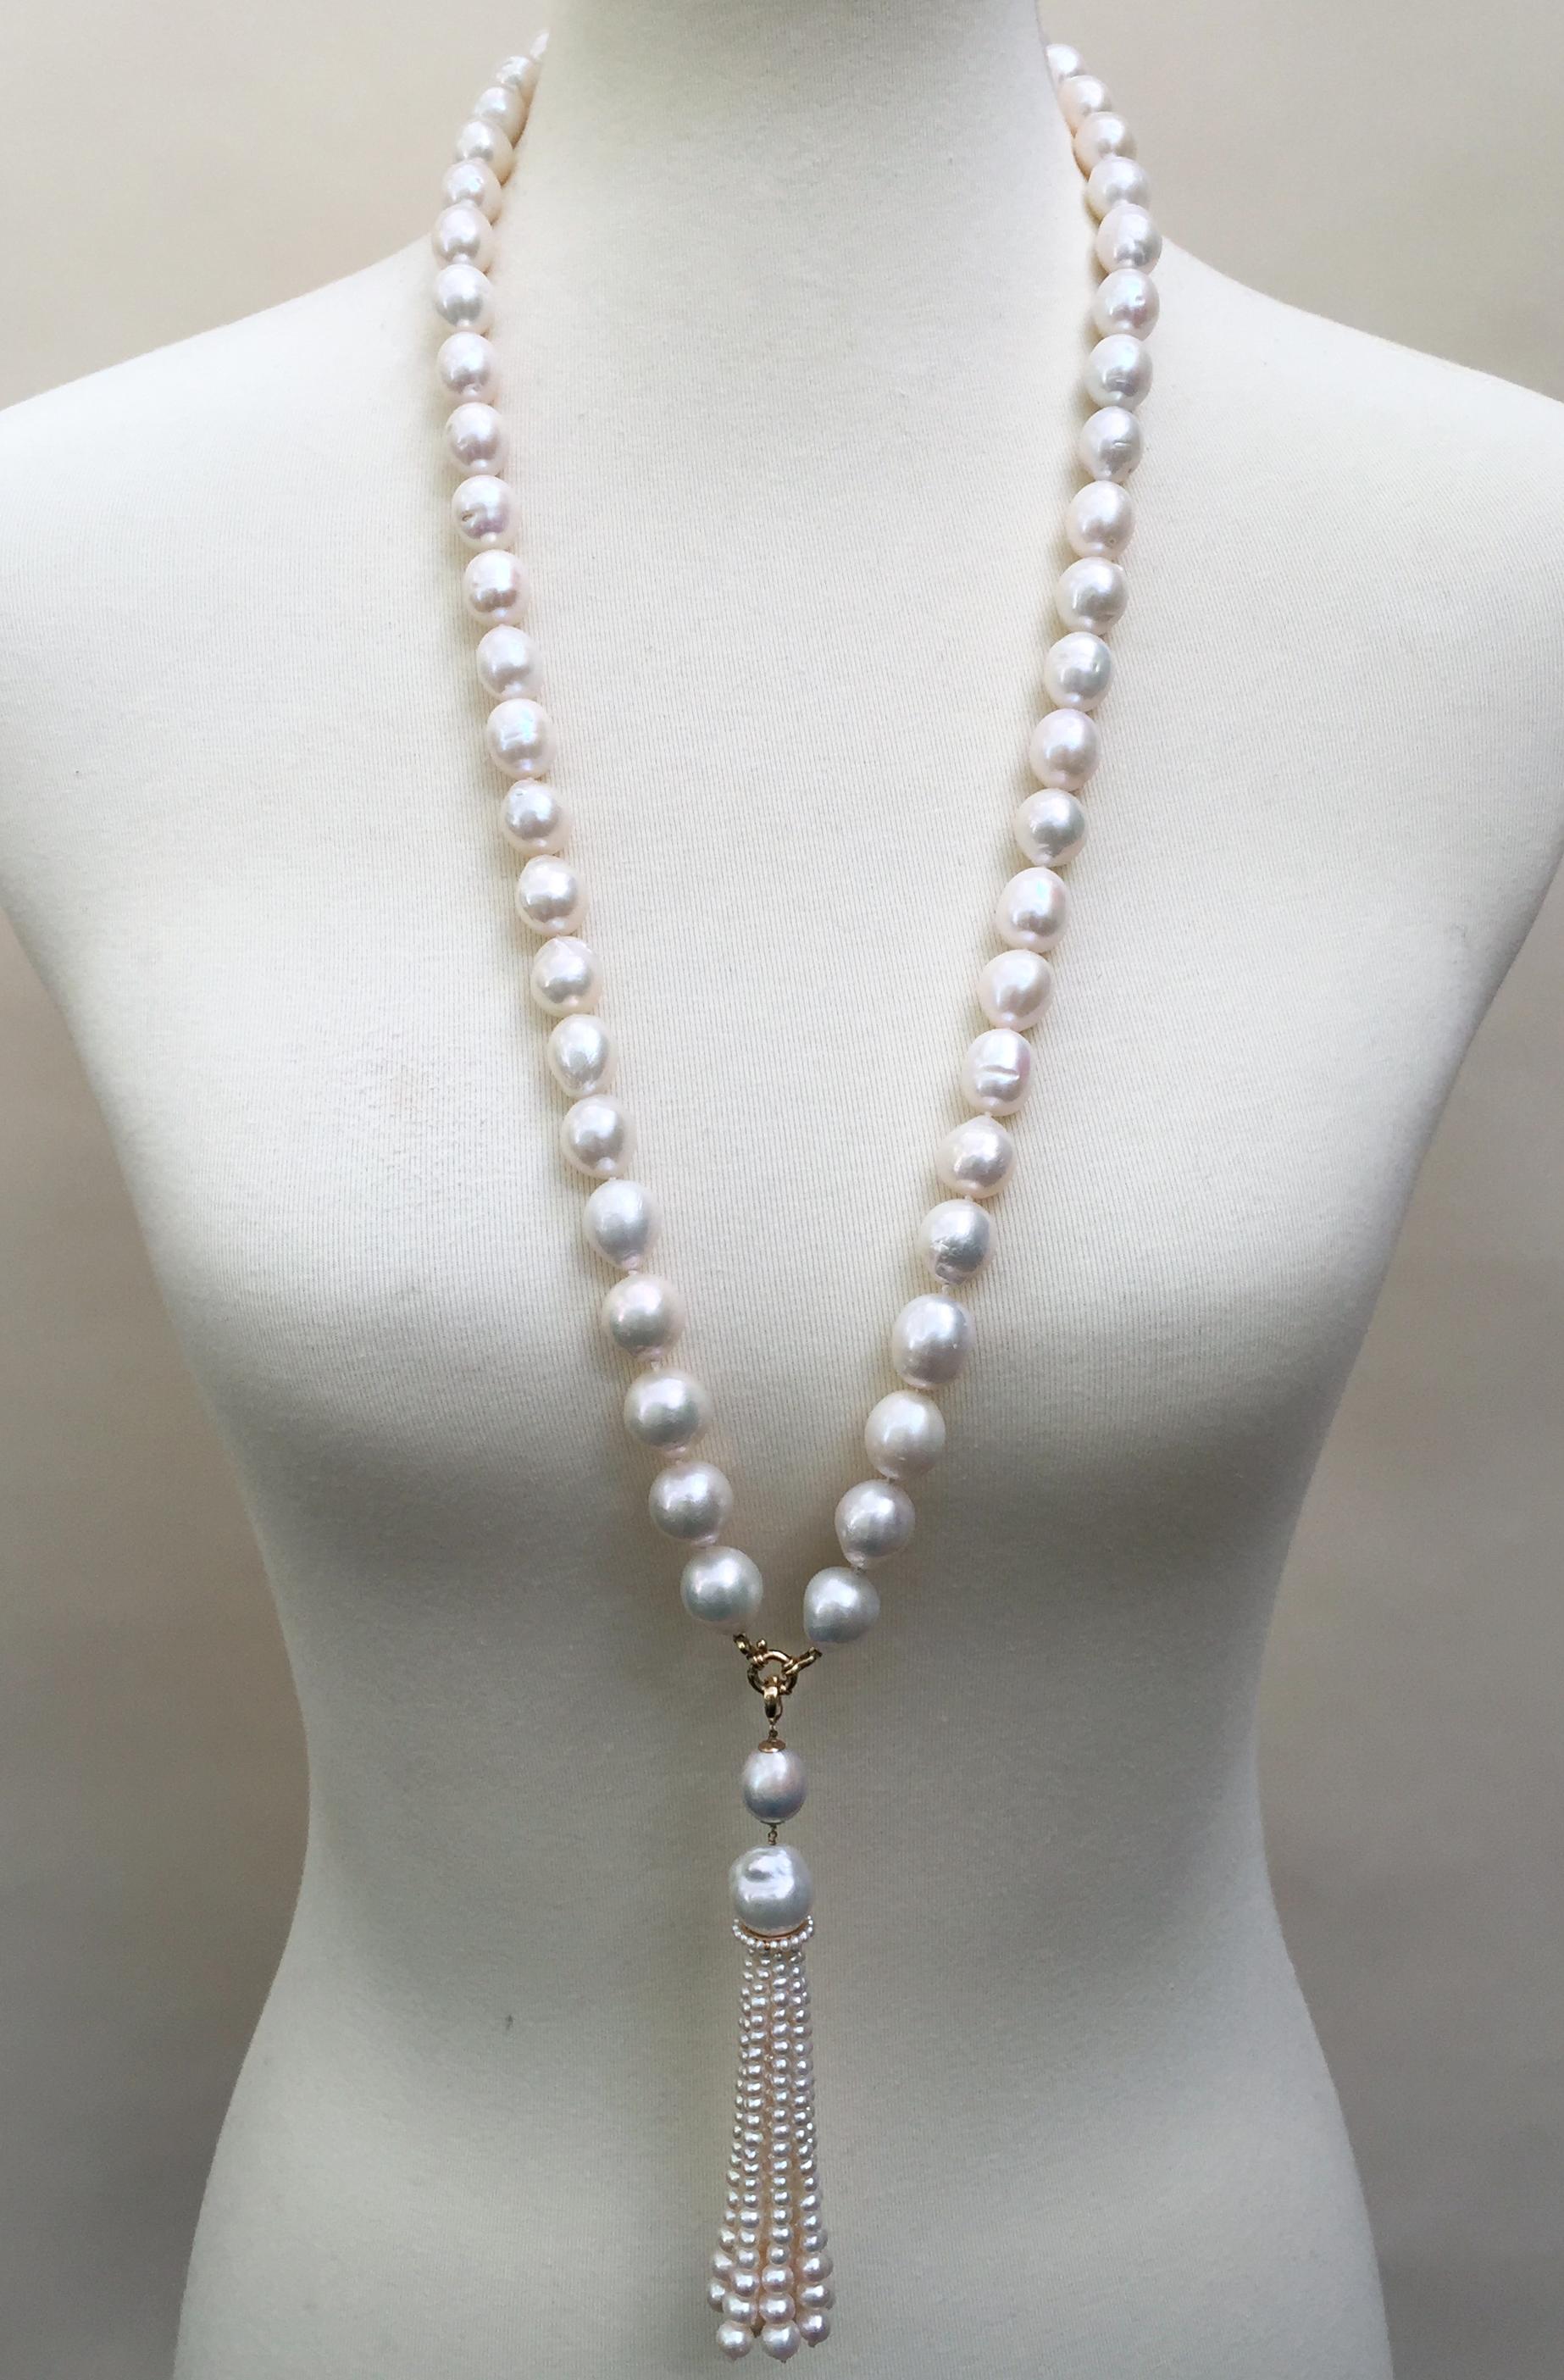 The glowing white pearl sautoir necklace has a gorgeous graduated white pearl tassel and a 14k yellow gold clasp. Each pearl was careful chosen by Marina J., the oval shaped pearls of the necklace measure 13-17mm.  At 33 inches long the necklace has